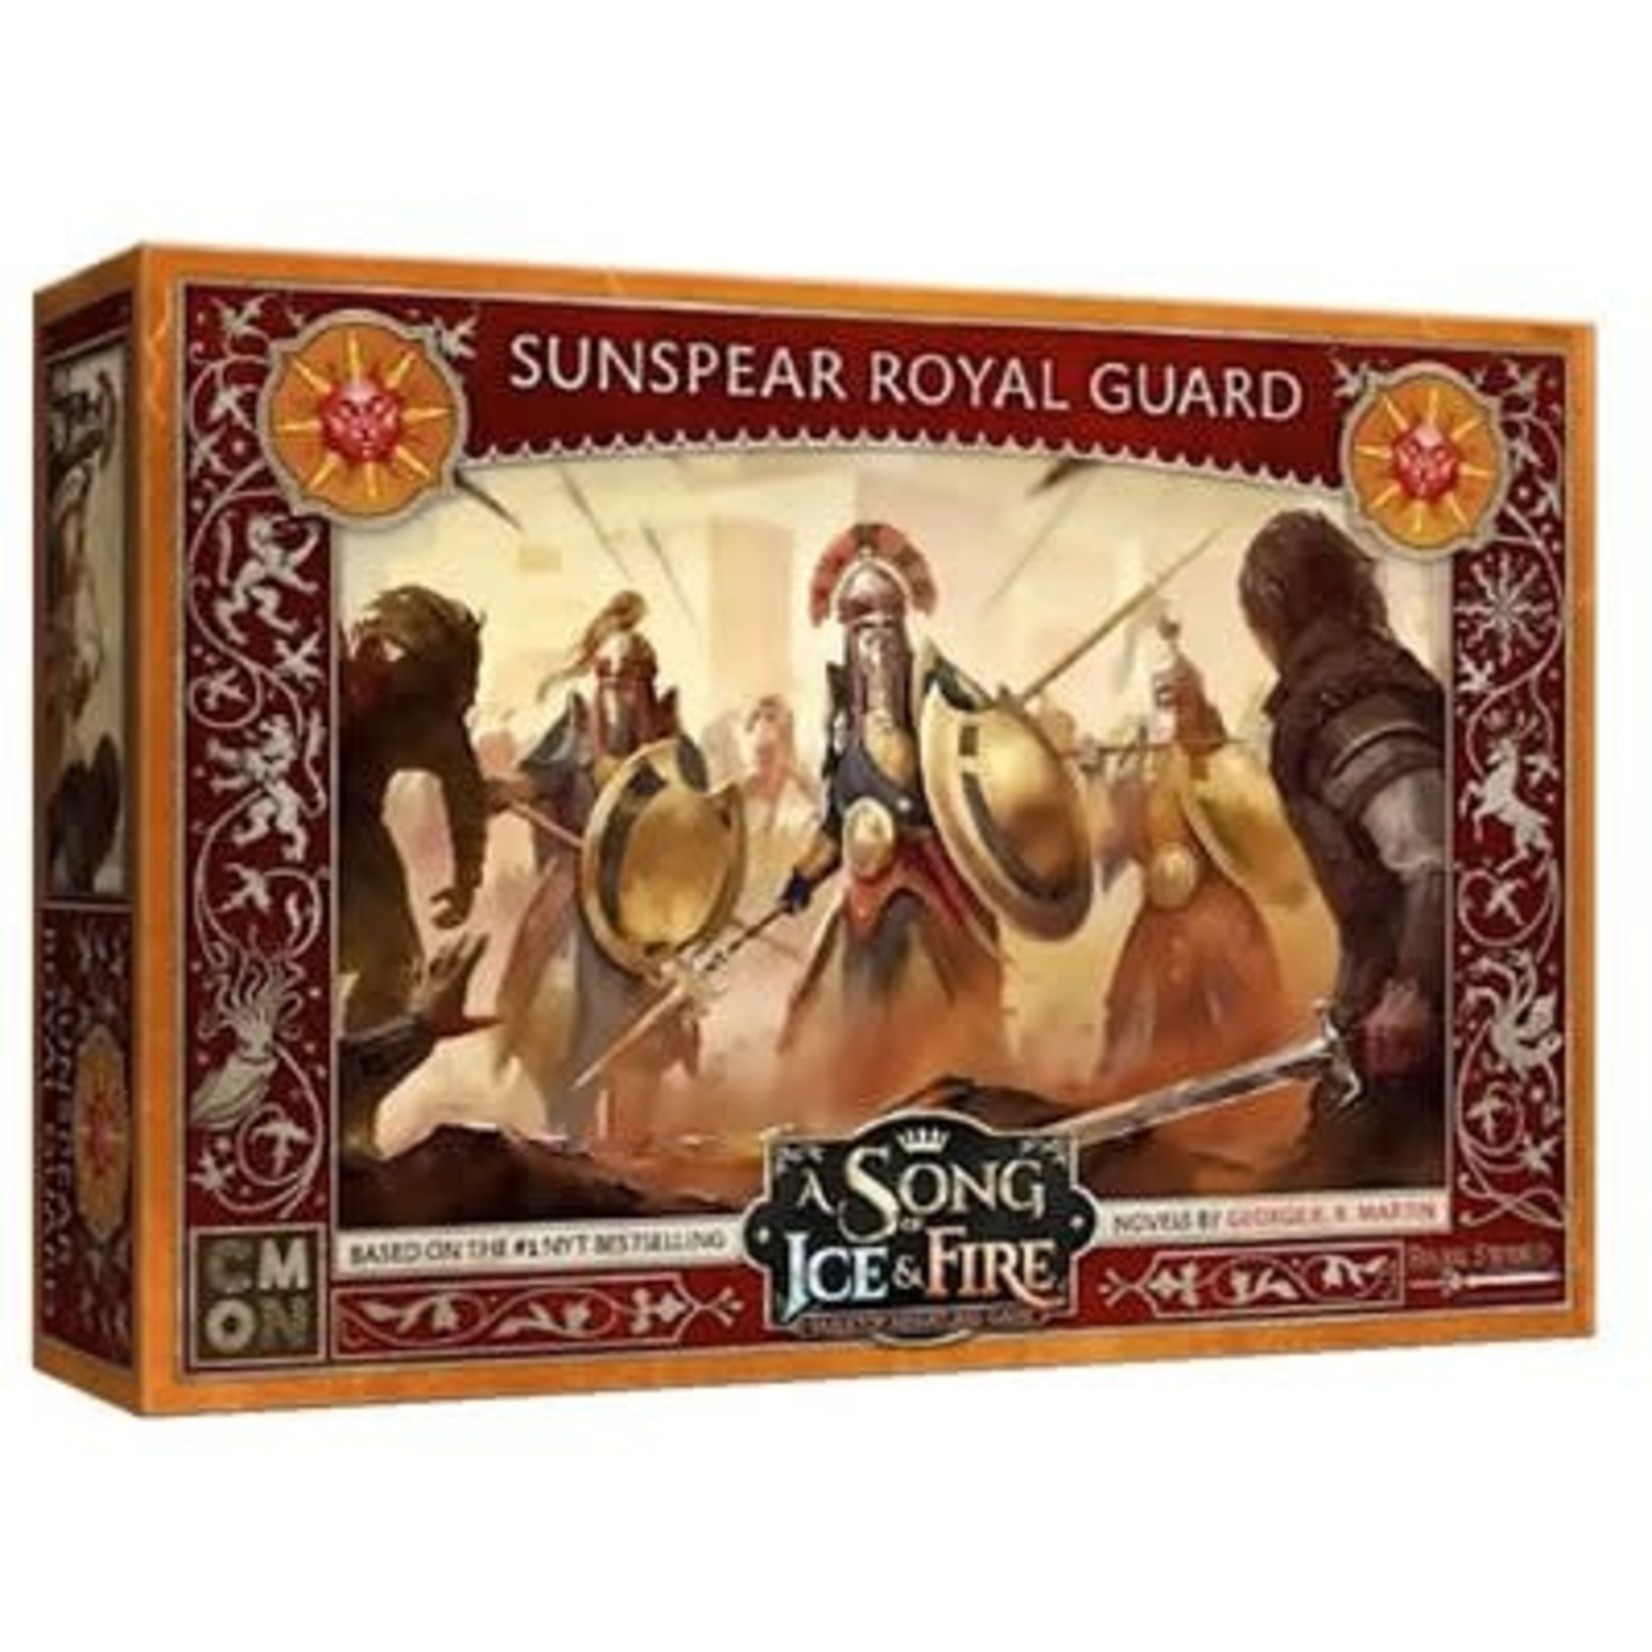 Sunspear Royal Guard: A Song of Ice & Fire: Tabletop Miniatures Game